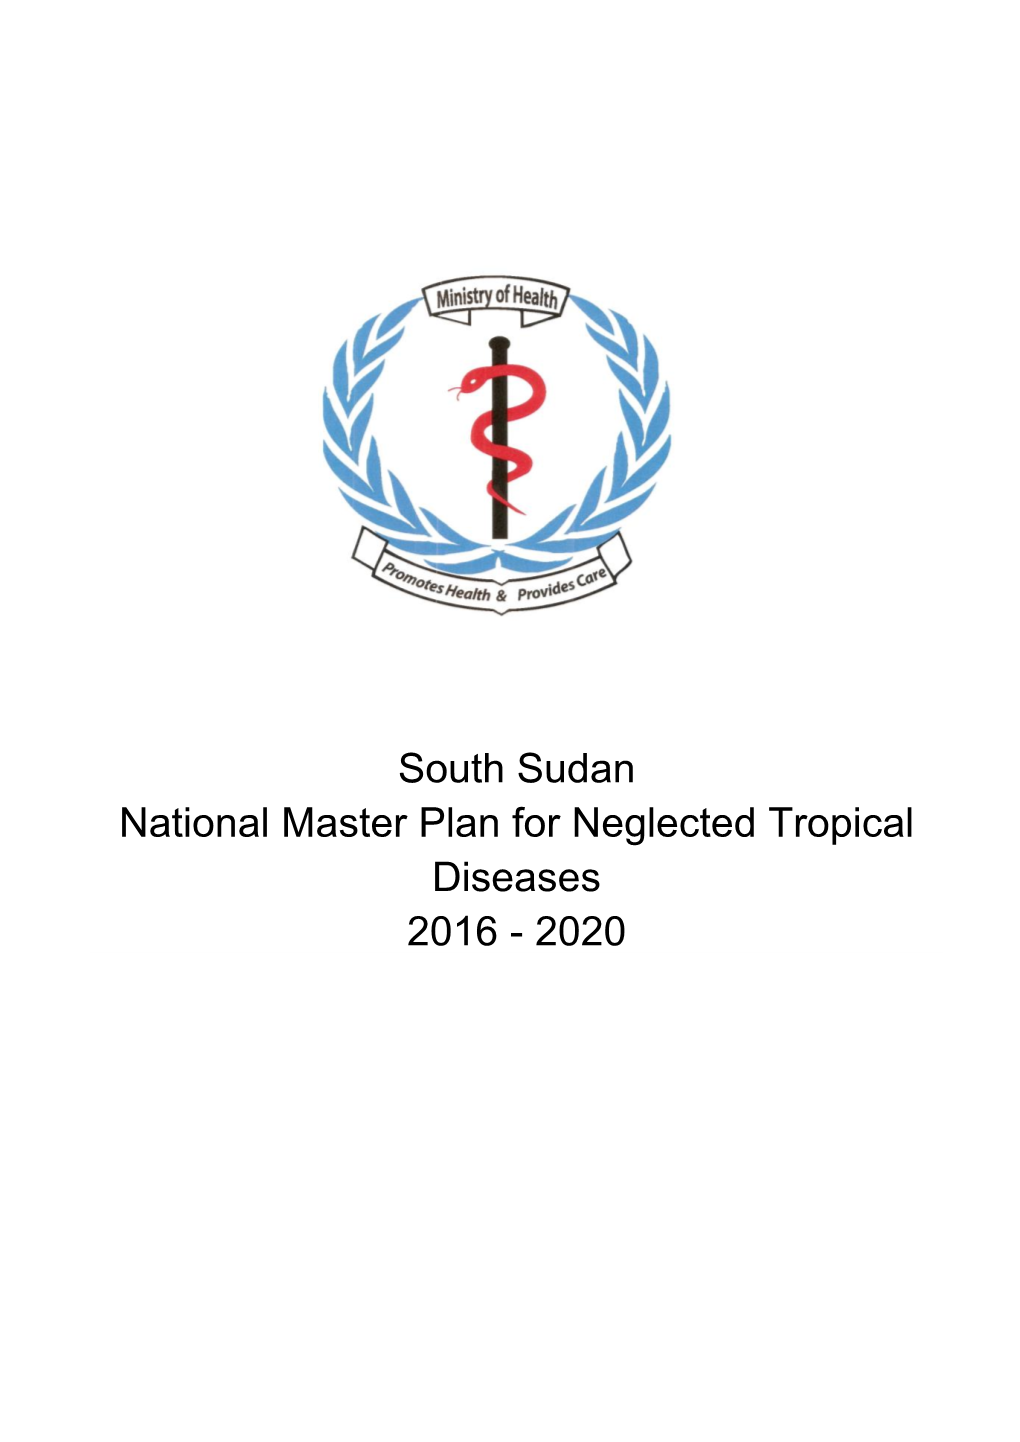 South Sudan National Master Plan for Neglected Tropical Diseases